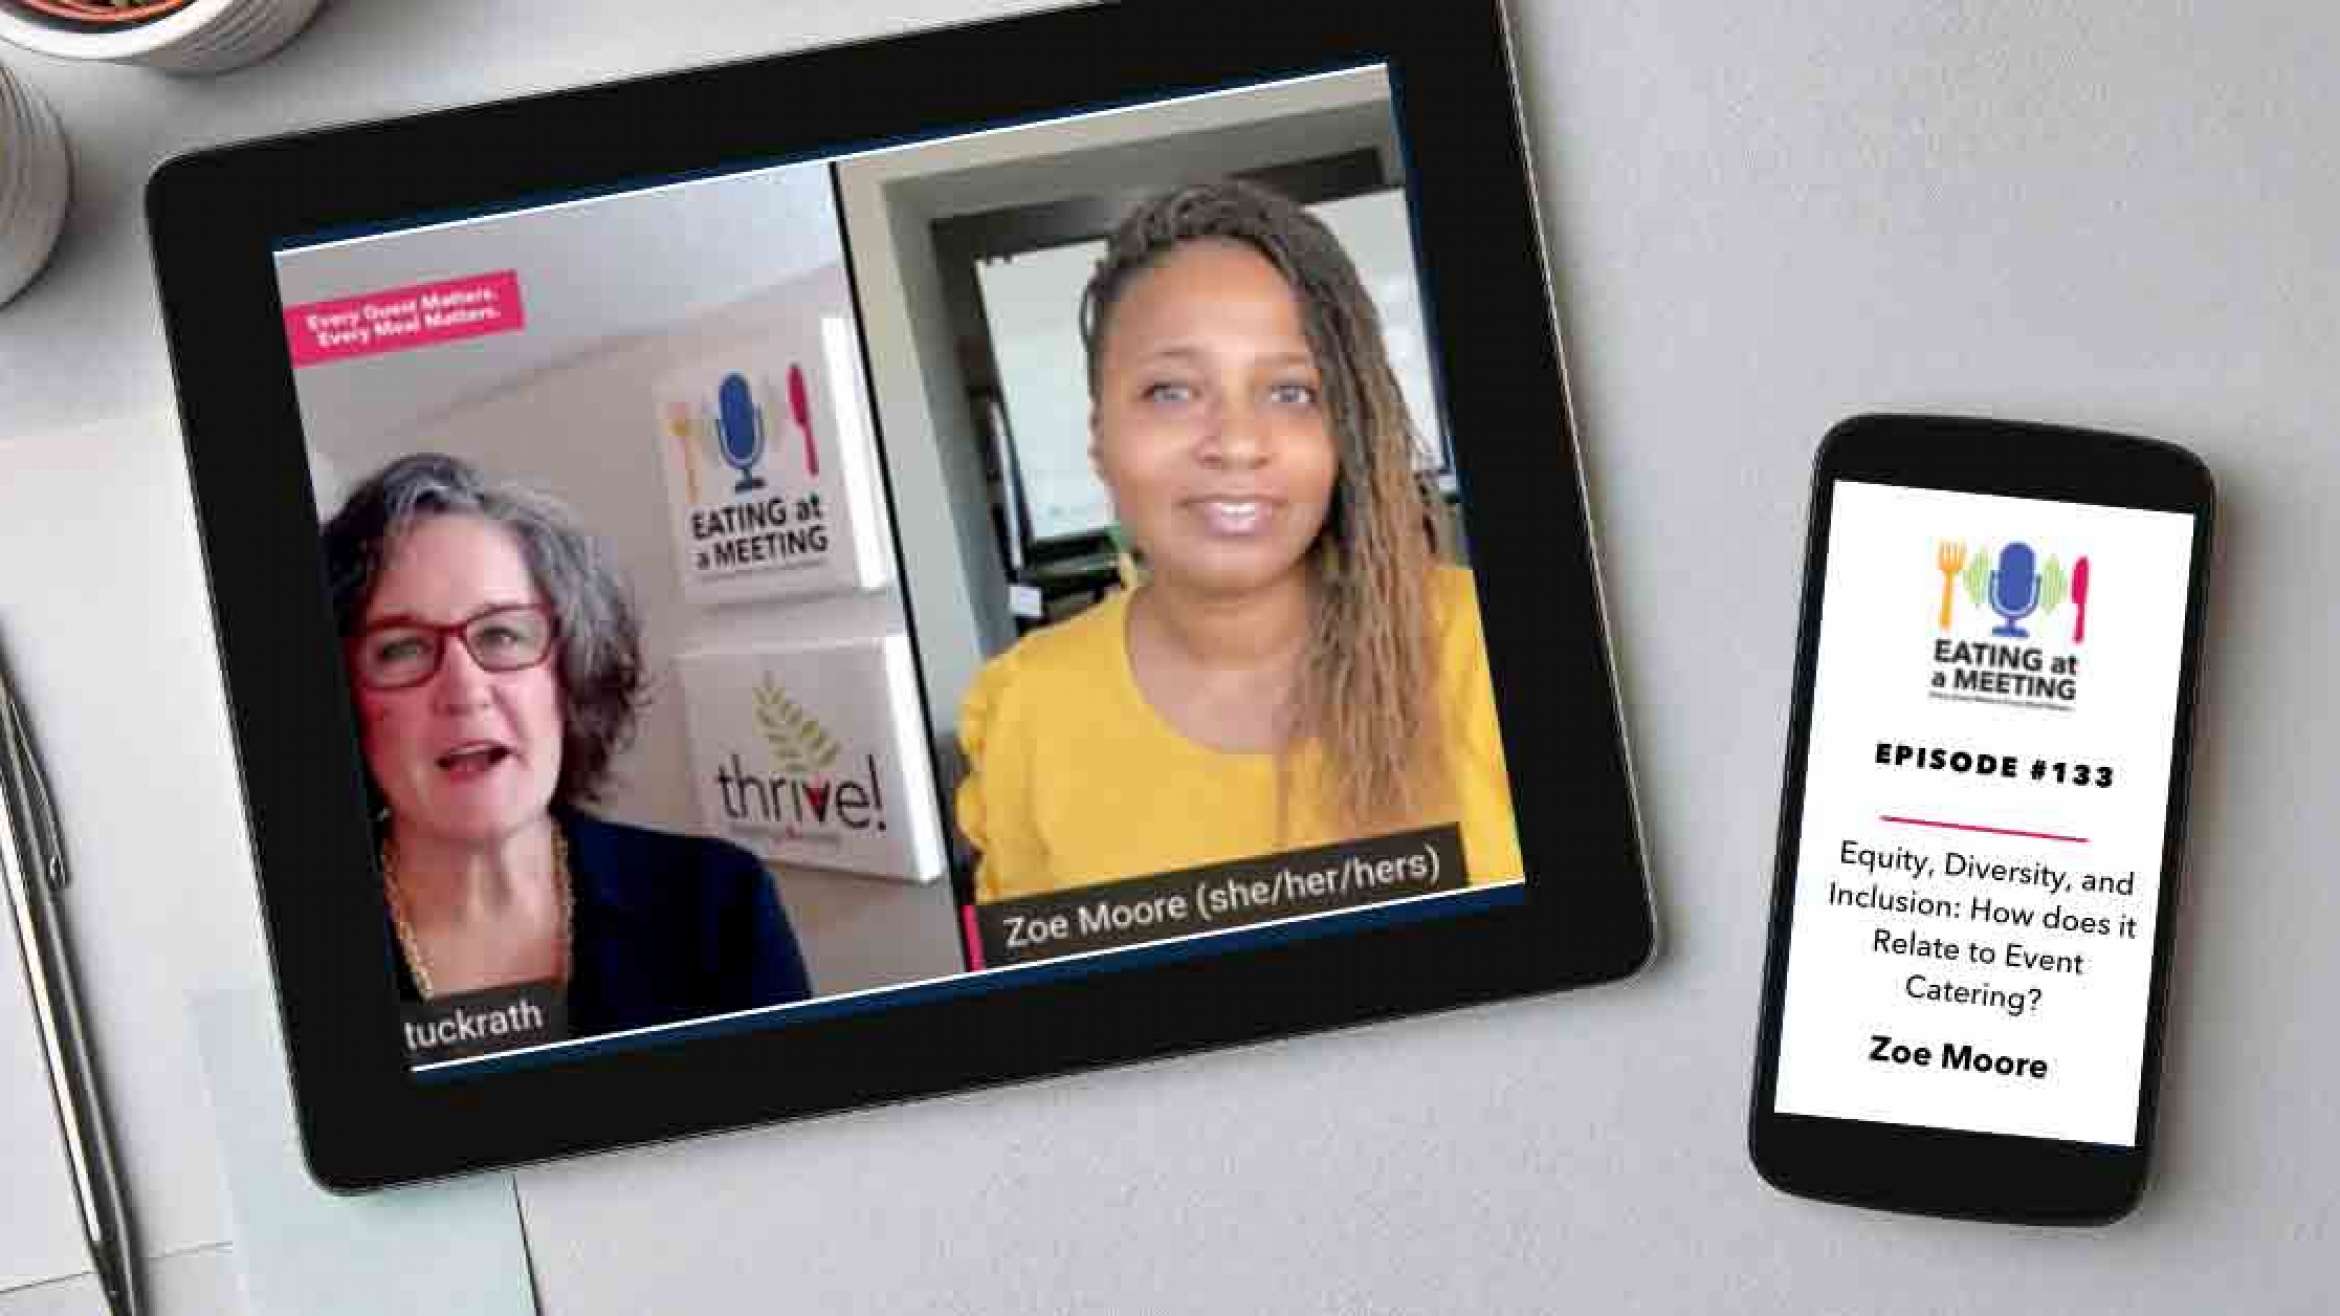 An iPad and iPhone on a table. On the iPad is a picture of two men who are on video screen. On the iPhone is the Eating at a Meeting podcast logo with Episode #133 Equity, Diversity, and Inclusion: How does it Relate to Event Catering? with Zoe Moore.